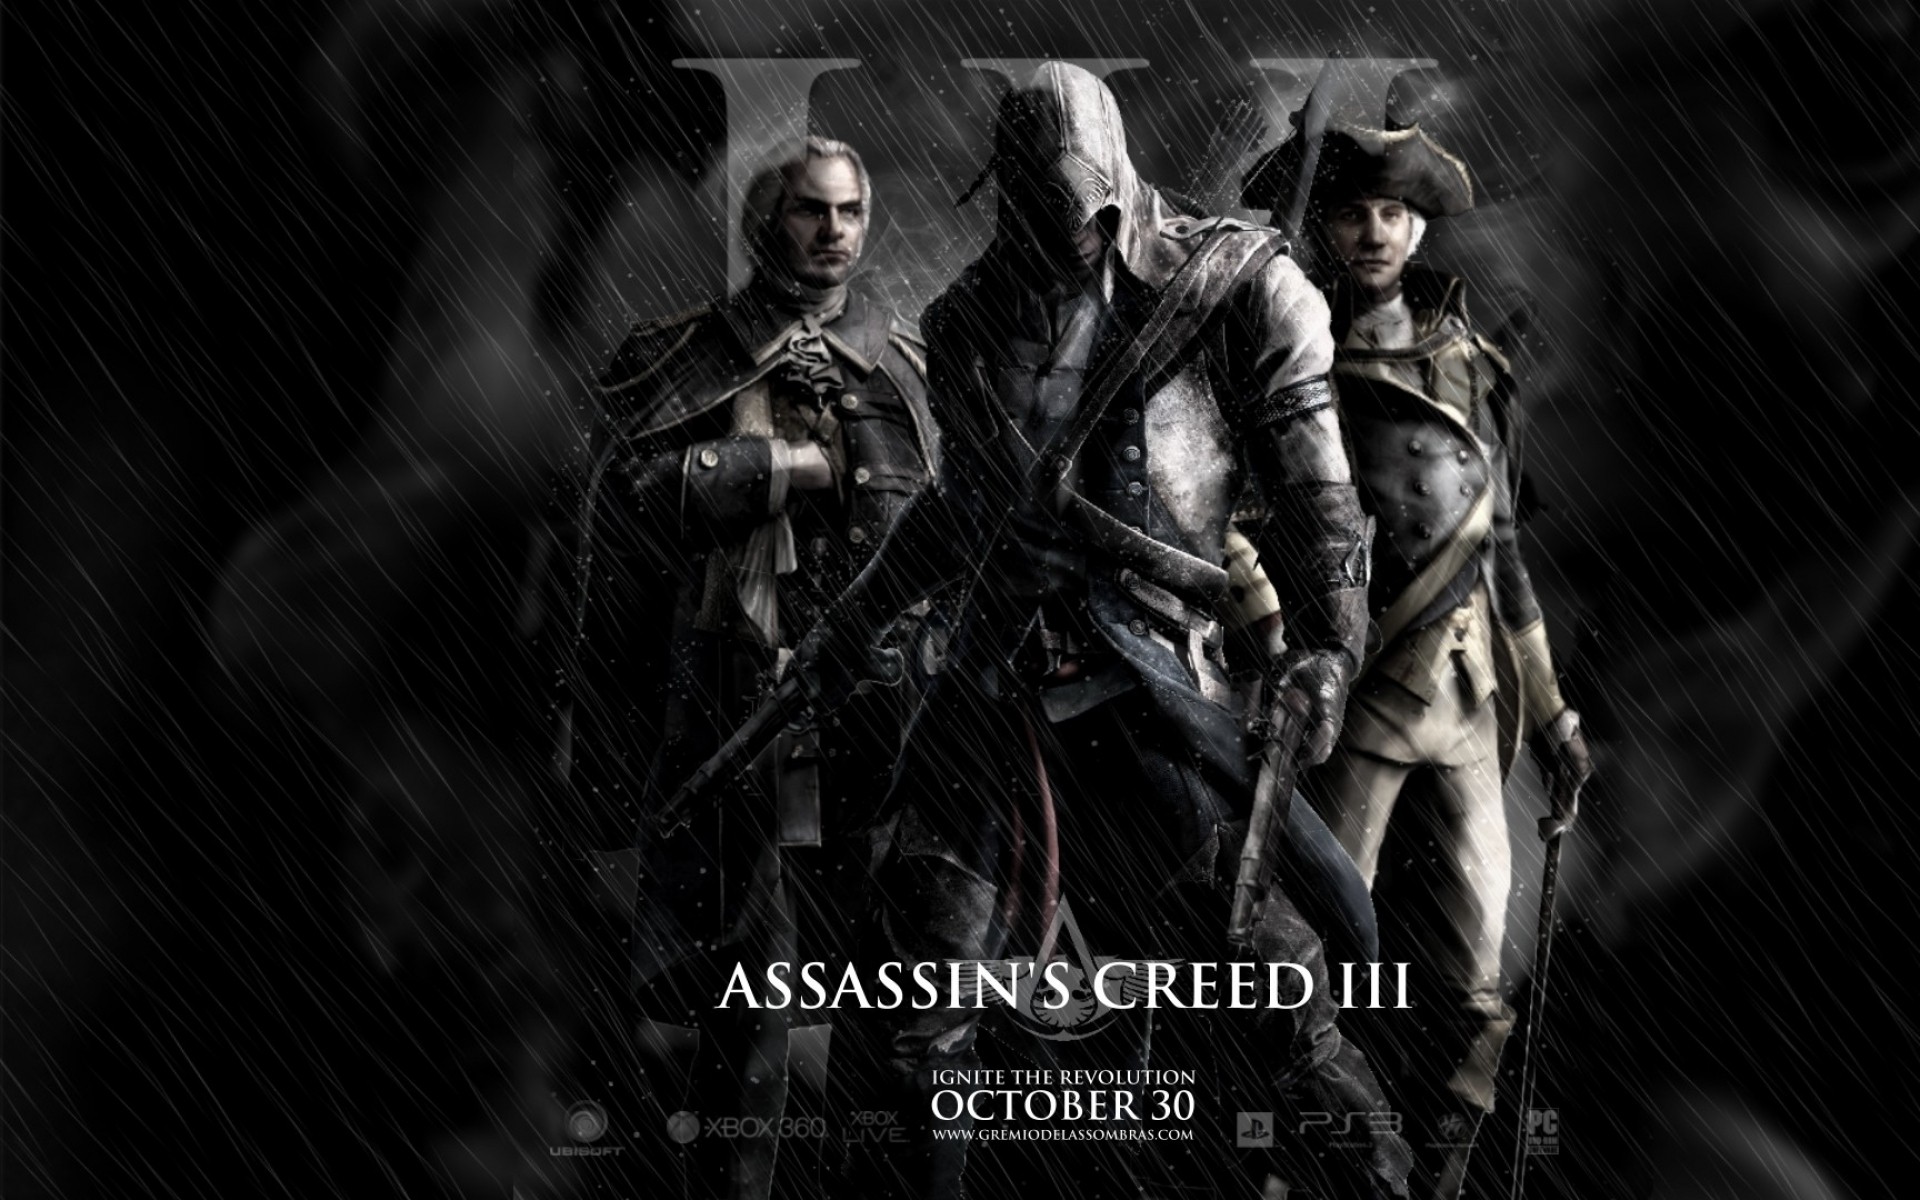 General 1920x1200 Assassin's Creed video game art Assassin's Creed III Ubisoft video game men rain gun hoods PC gaming